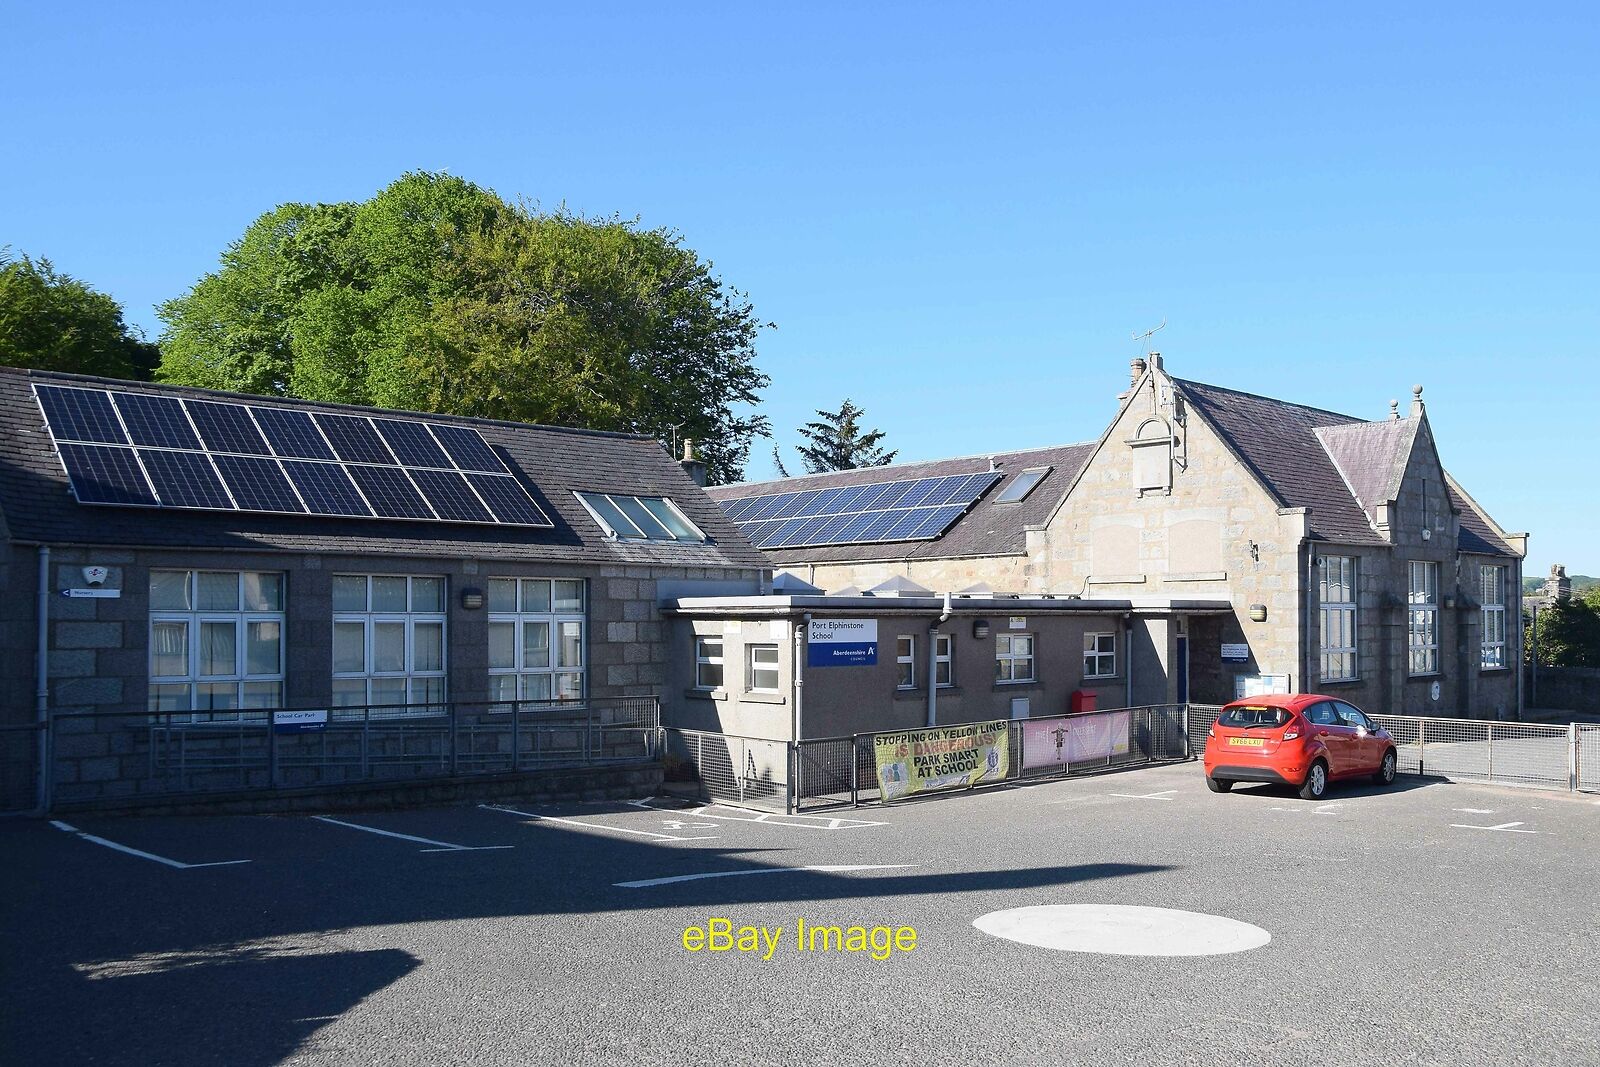 Photo 12x8 Port Elphinstone Primary School Inverurie Built 1870 and extend c2020